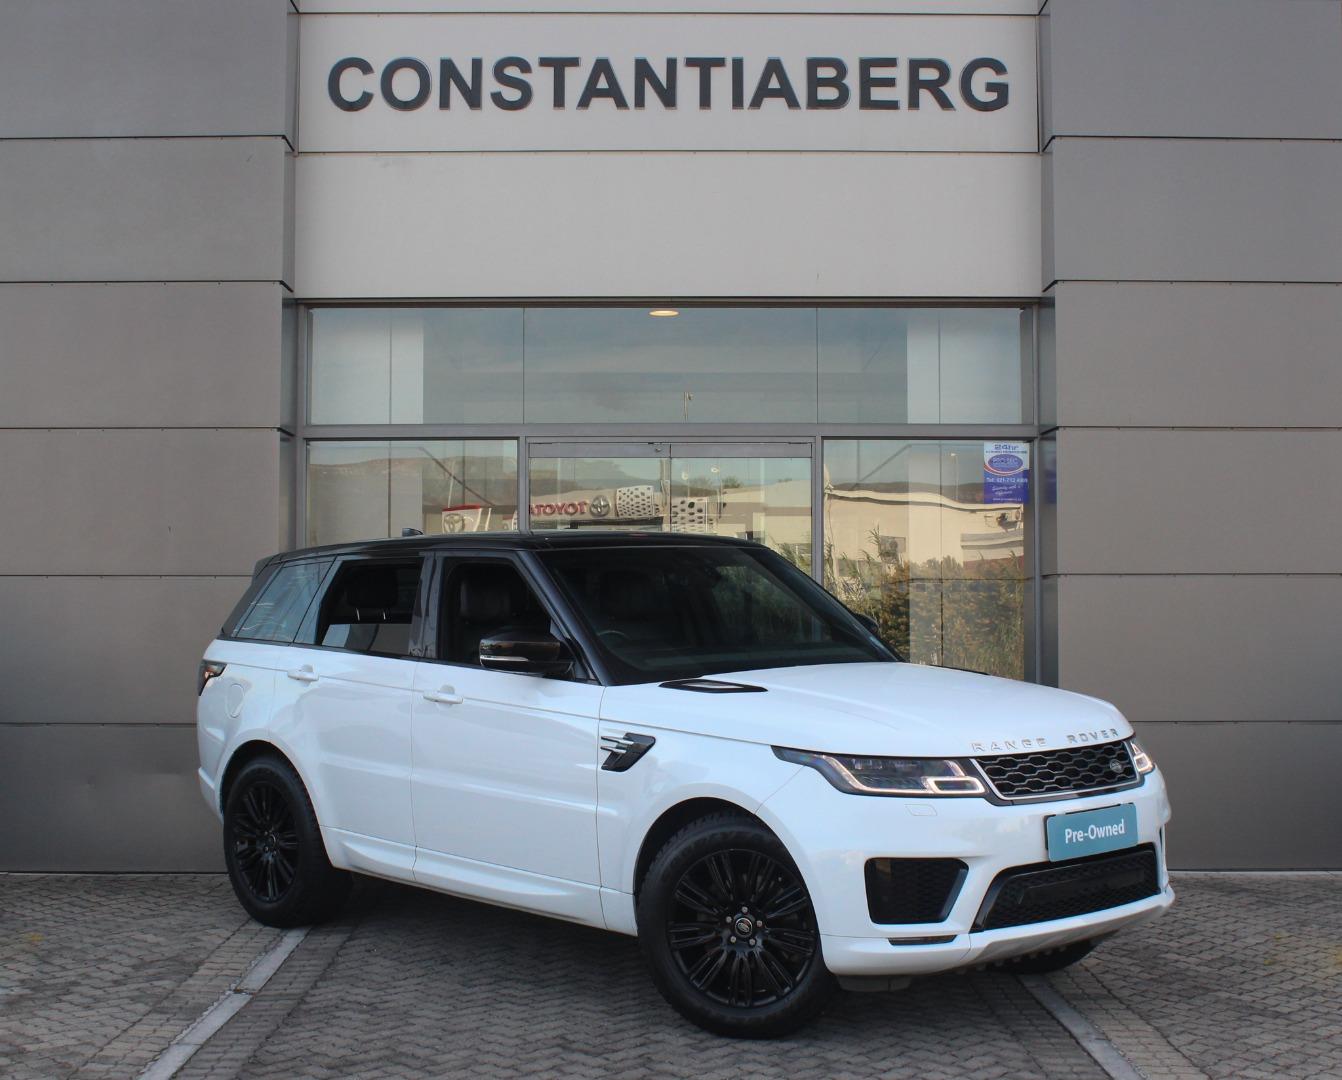 2020 Land Rover Range Rover Sport  for sale - 9966323